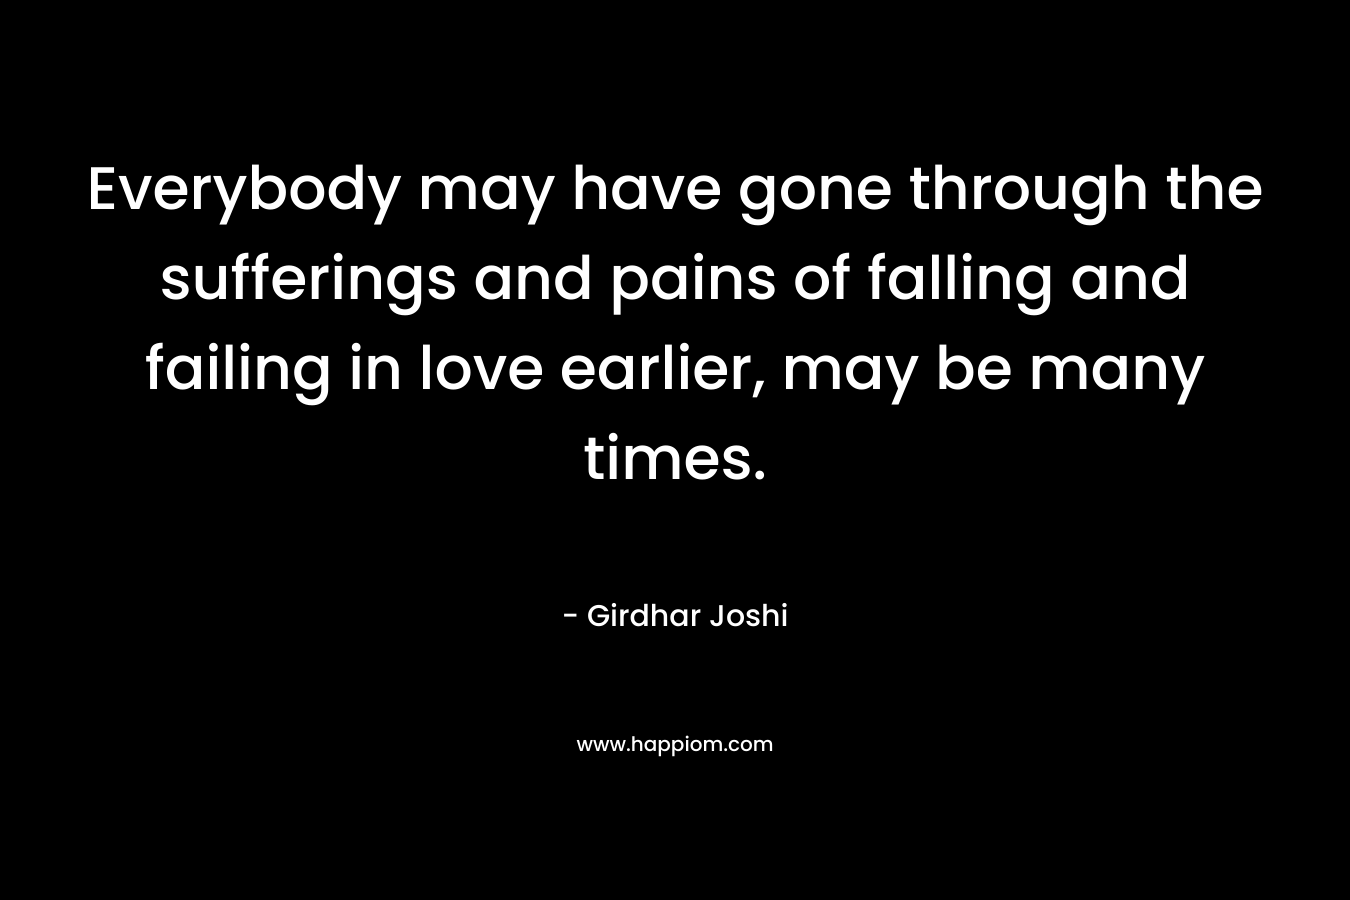 Everybody may have gone through the sufferings and pains of falling and failing in love earlier, may be many times. – Girdhar Joshi